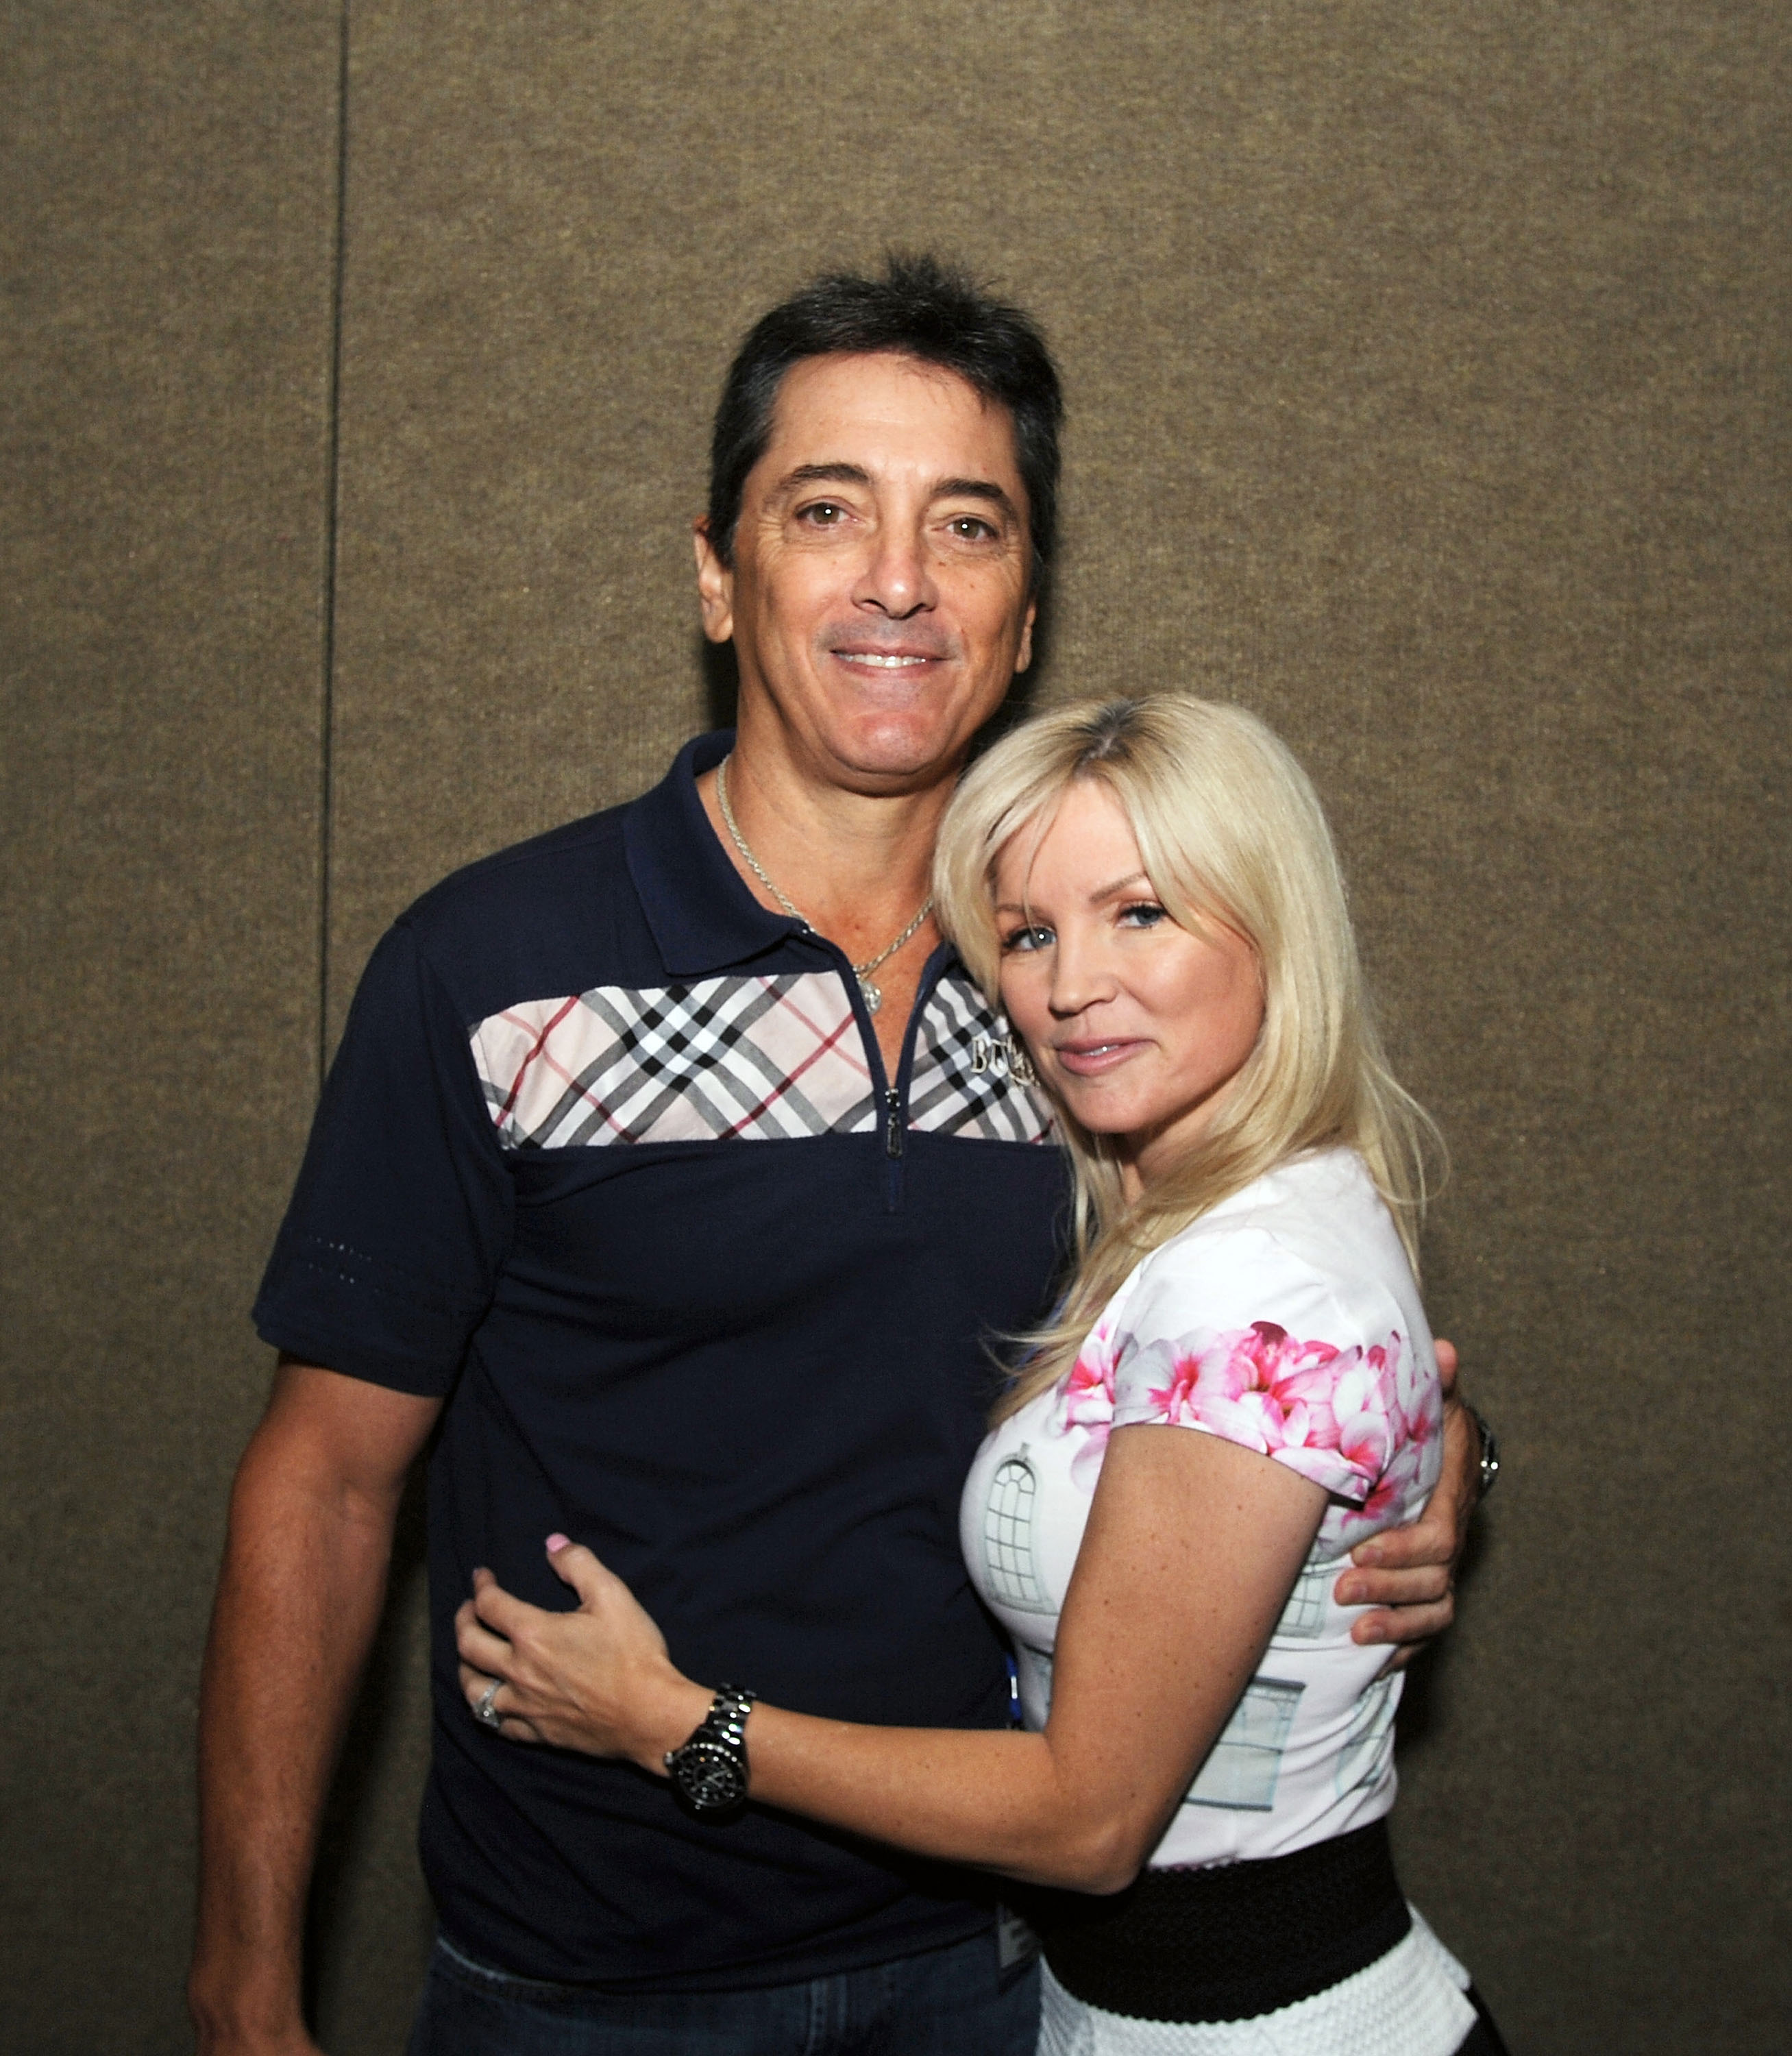 Scott Baio and his wife Renee Sloan attend the 2018 STL Pop Culture Con at St. Charles Convention Center on August 19, 2018, in St Charles, Missouri | Source: Getty Images